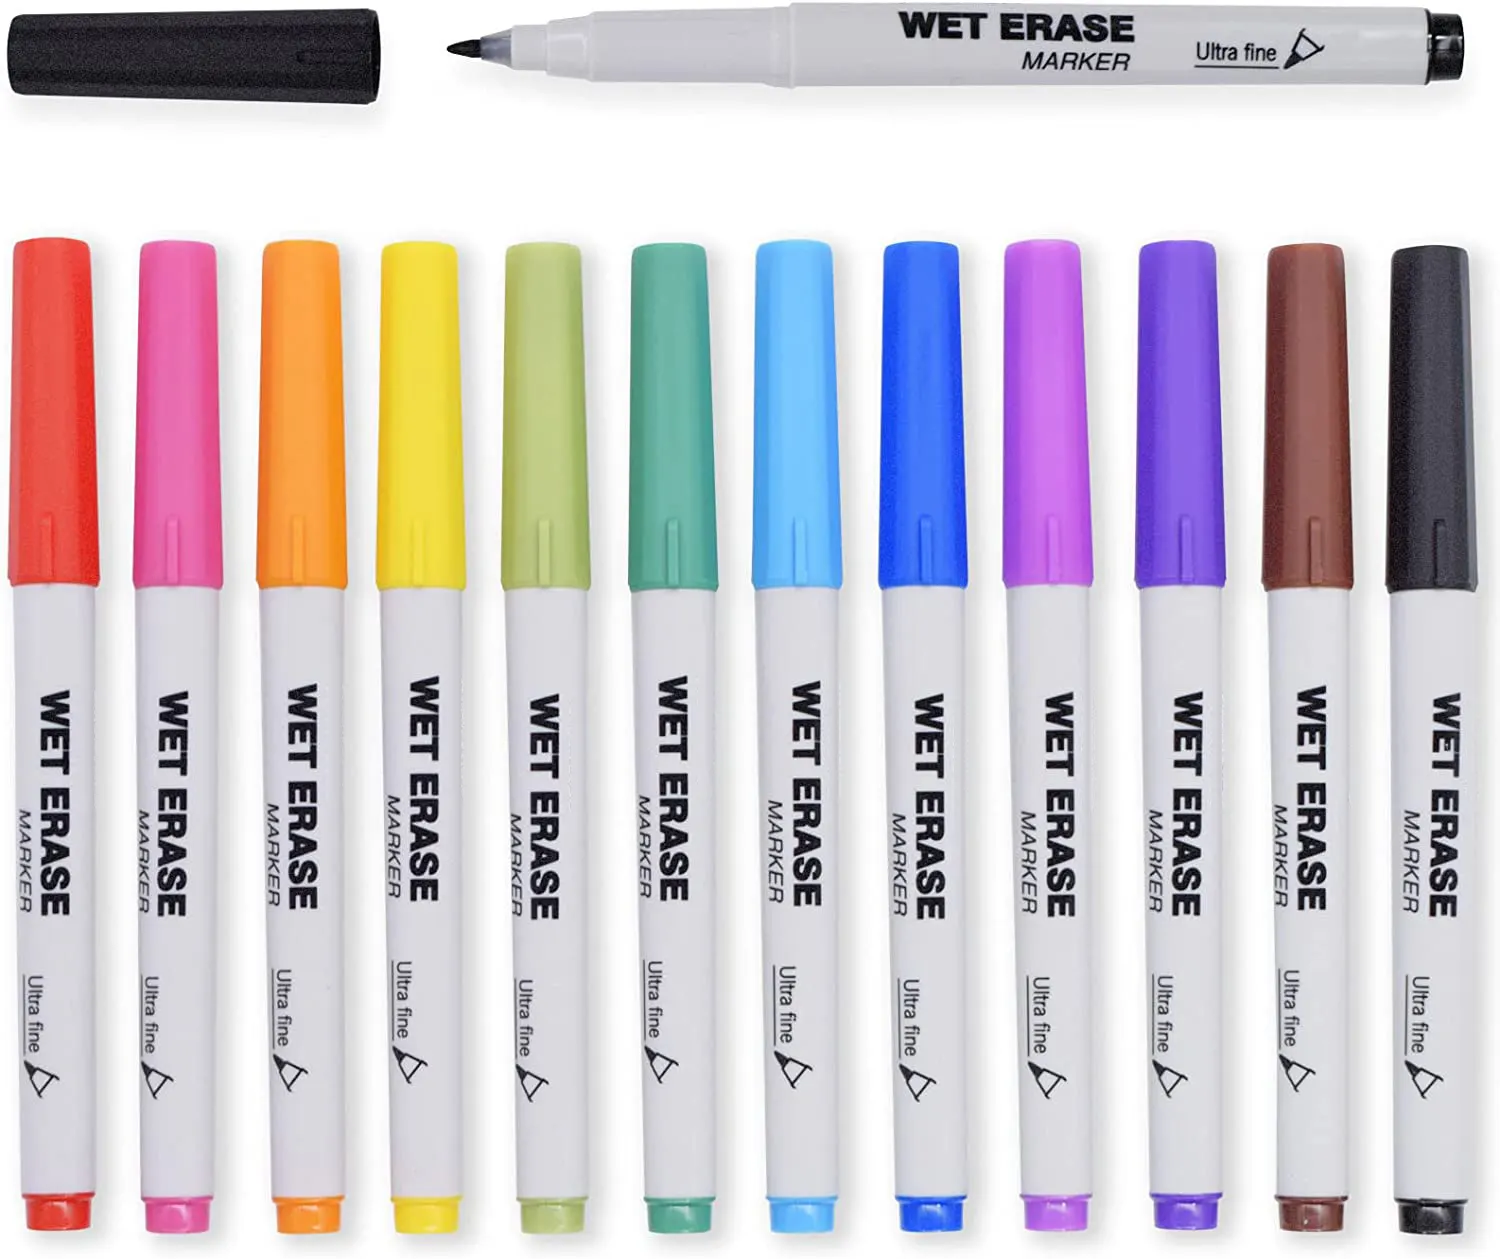 12 Colors Ultra Fine Tip Wet Erase Marker, Whiteboard Markers for School, Office, Home